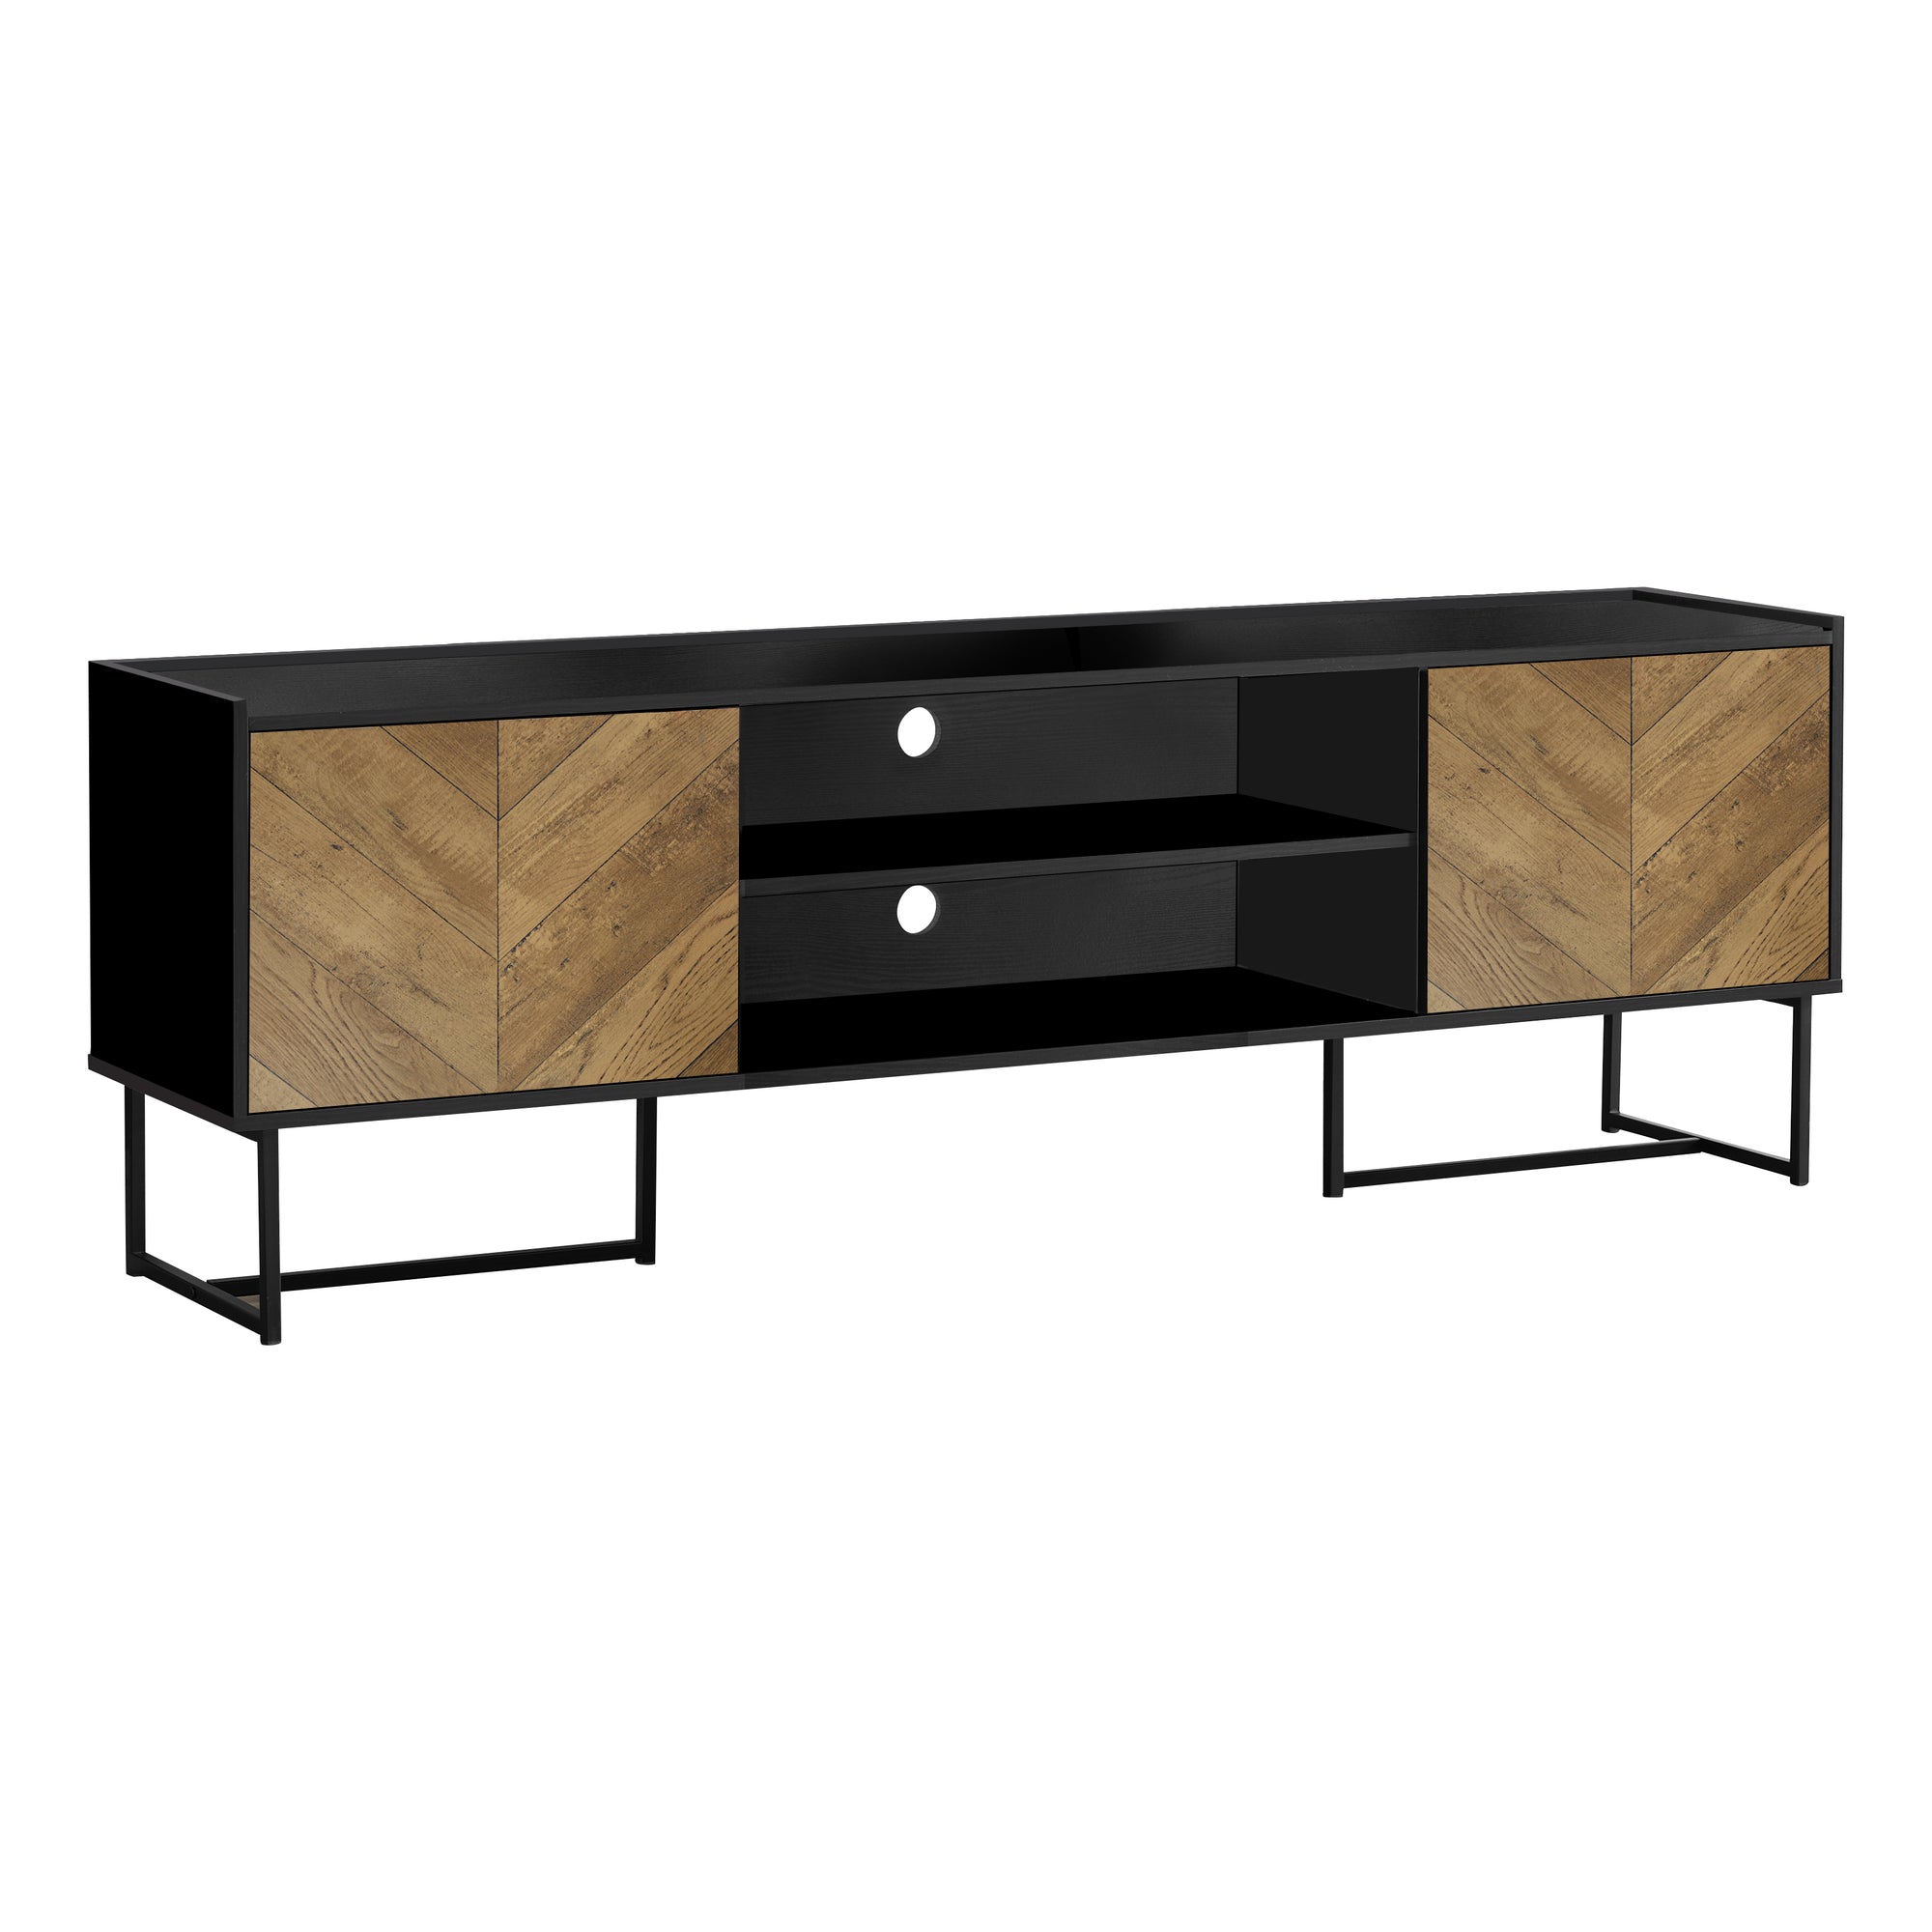 I 2752 - TV STAND - 72"L / BLACK / METAL WITH 2 WOOD-LOOK DOORS BY MONARCH SPECIALTIES INC